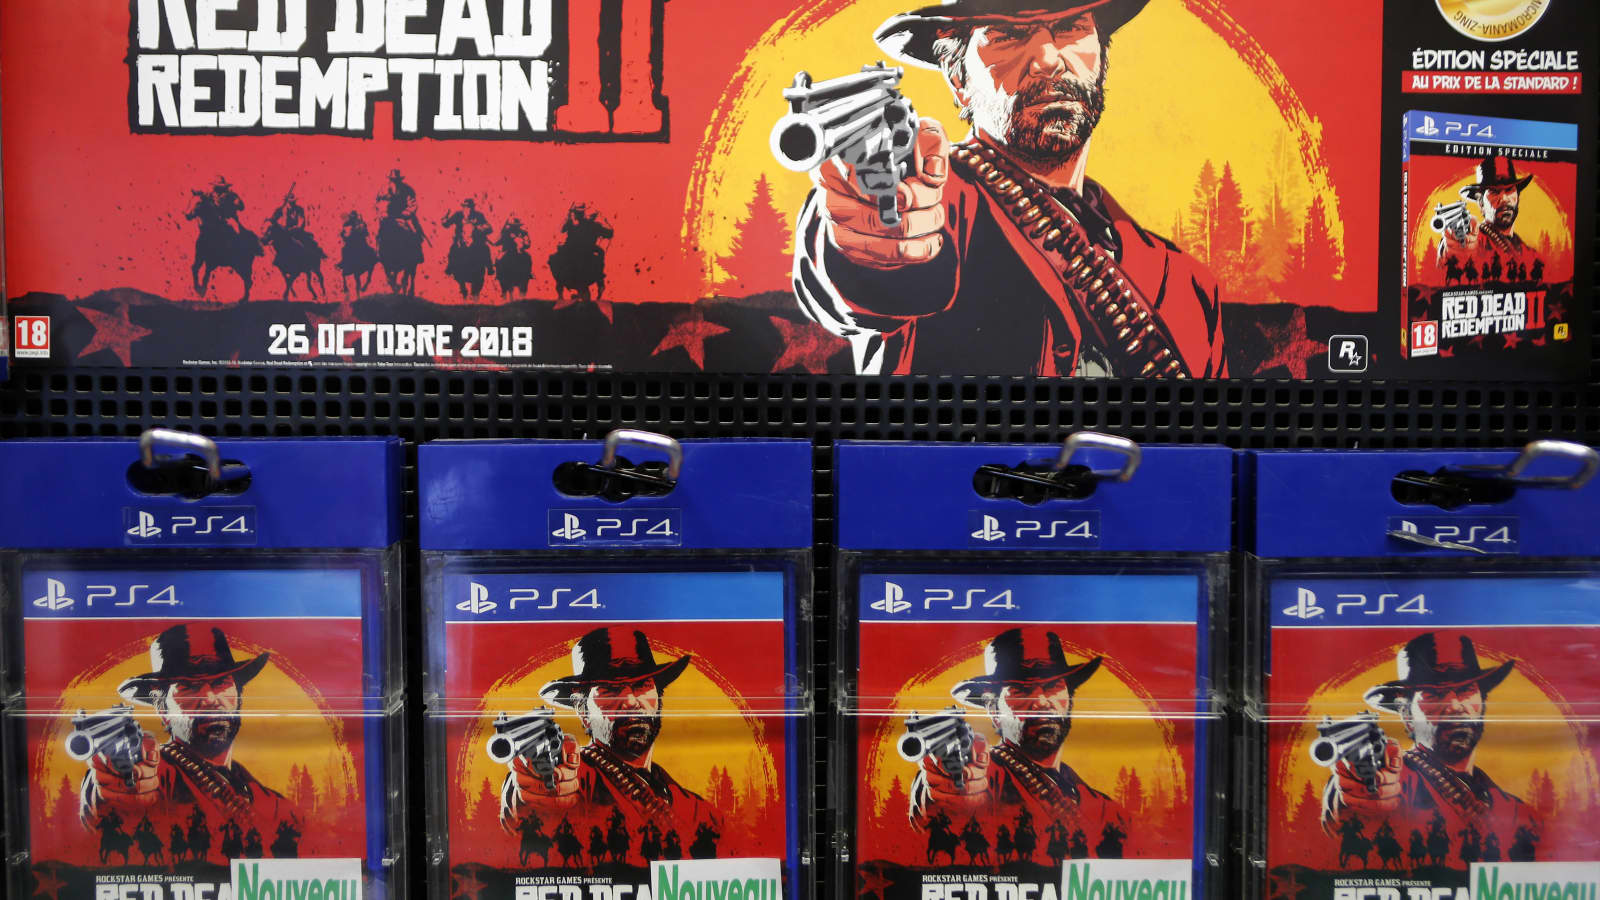 Rockstar's Red Dead Redemption 2 smashes opening weekend records